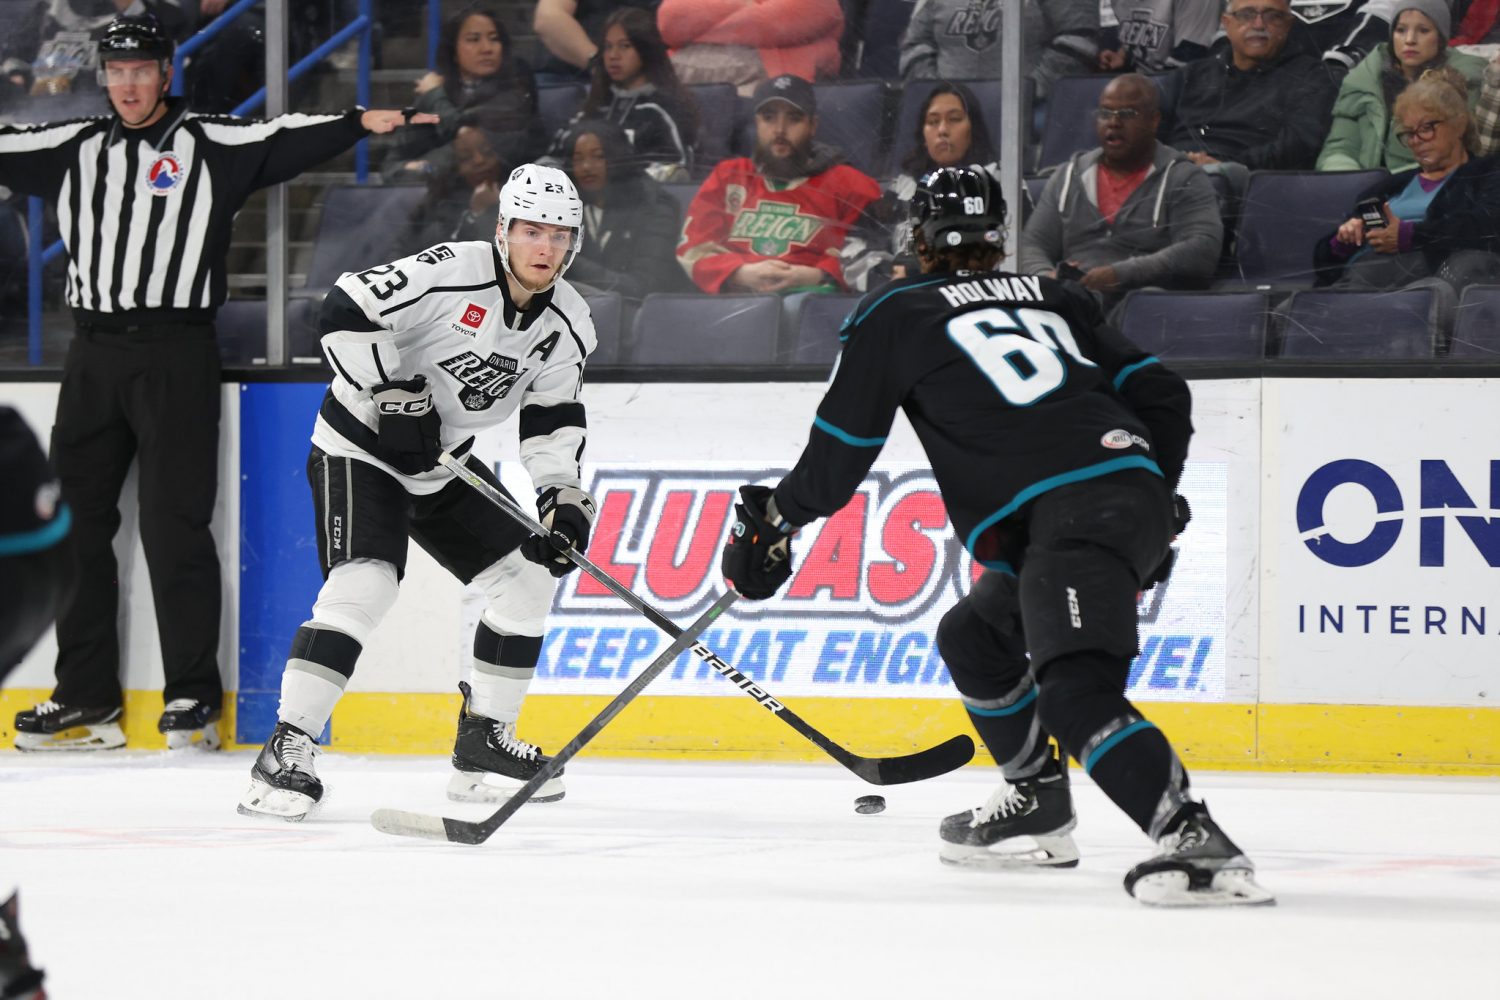 Home ice secured with 2-2 overtime tie